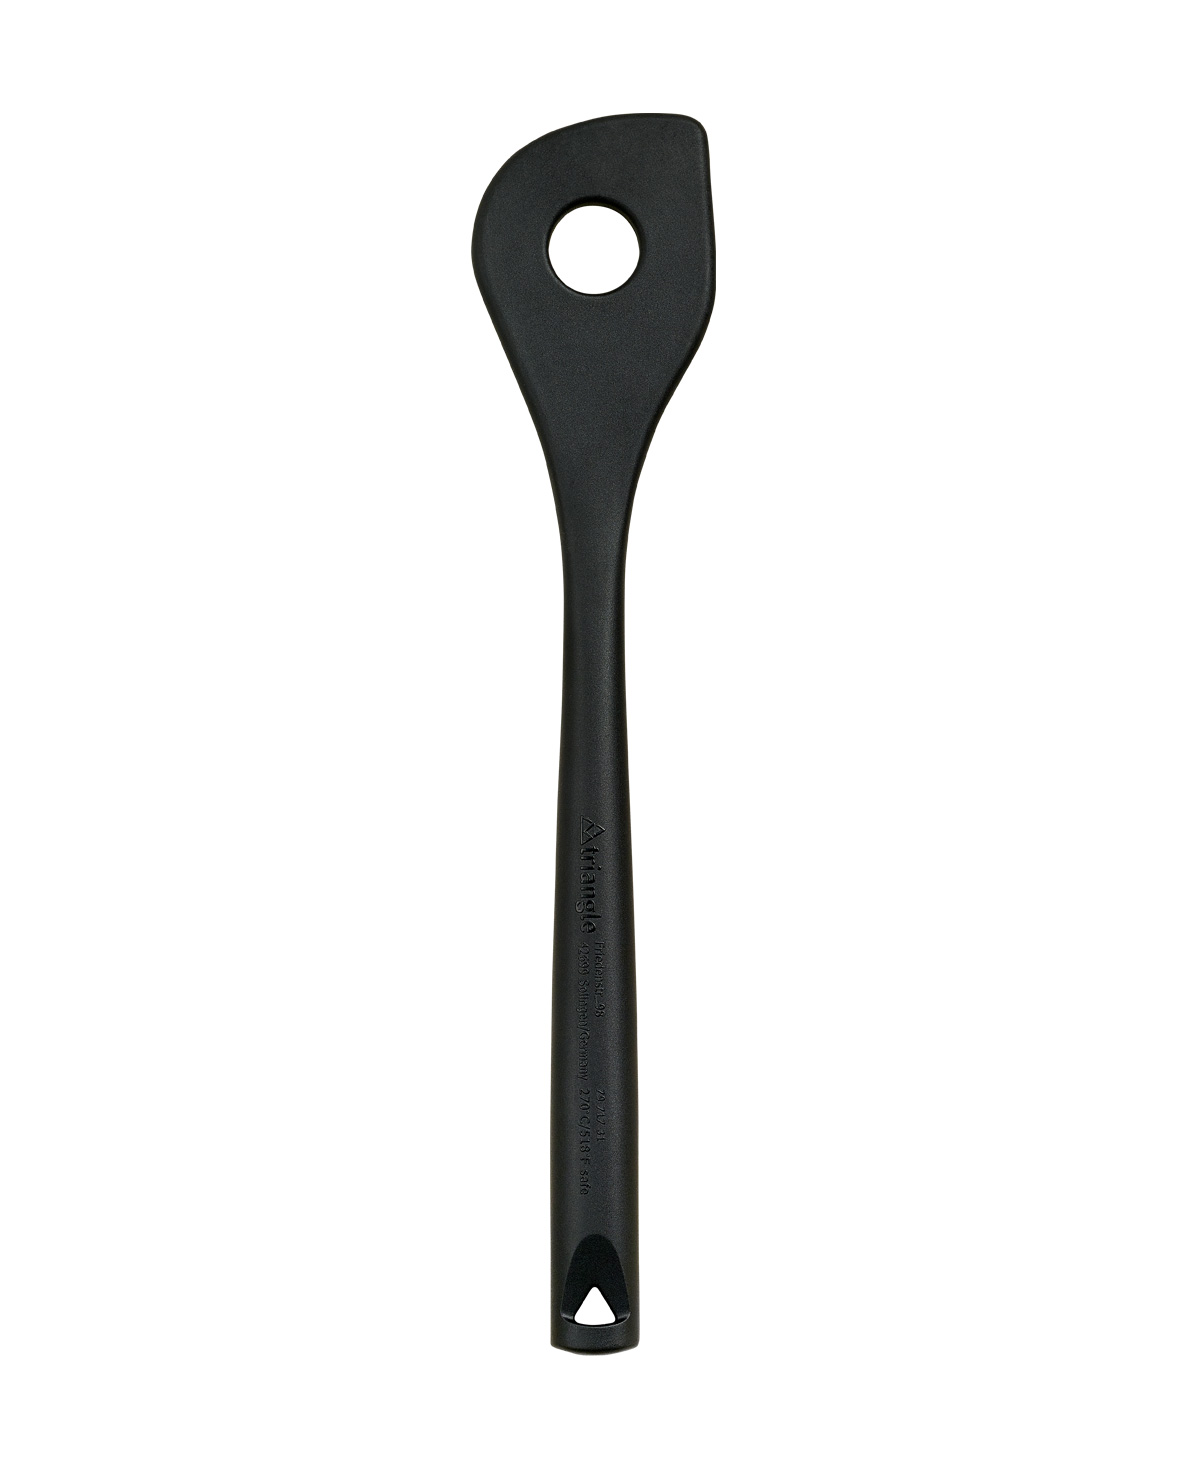 triangle mixing spoon high temperature resistant 270°C 518°F series spirit back